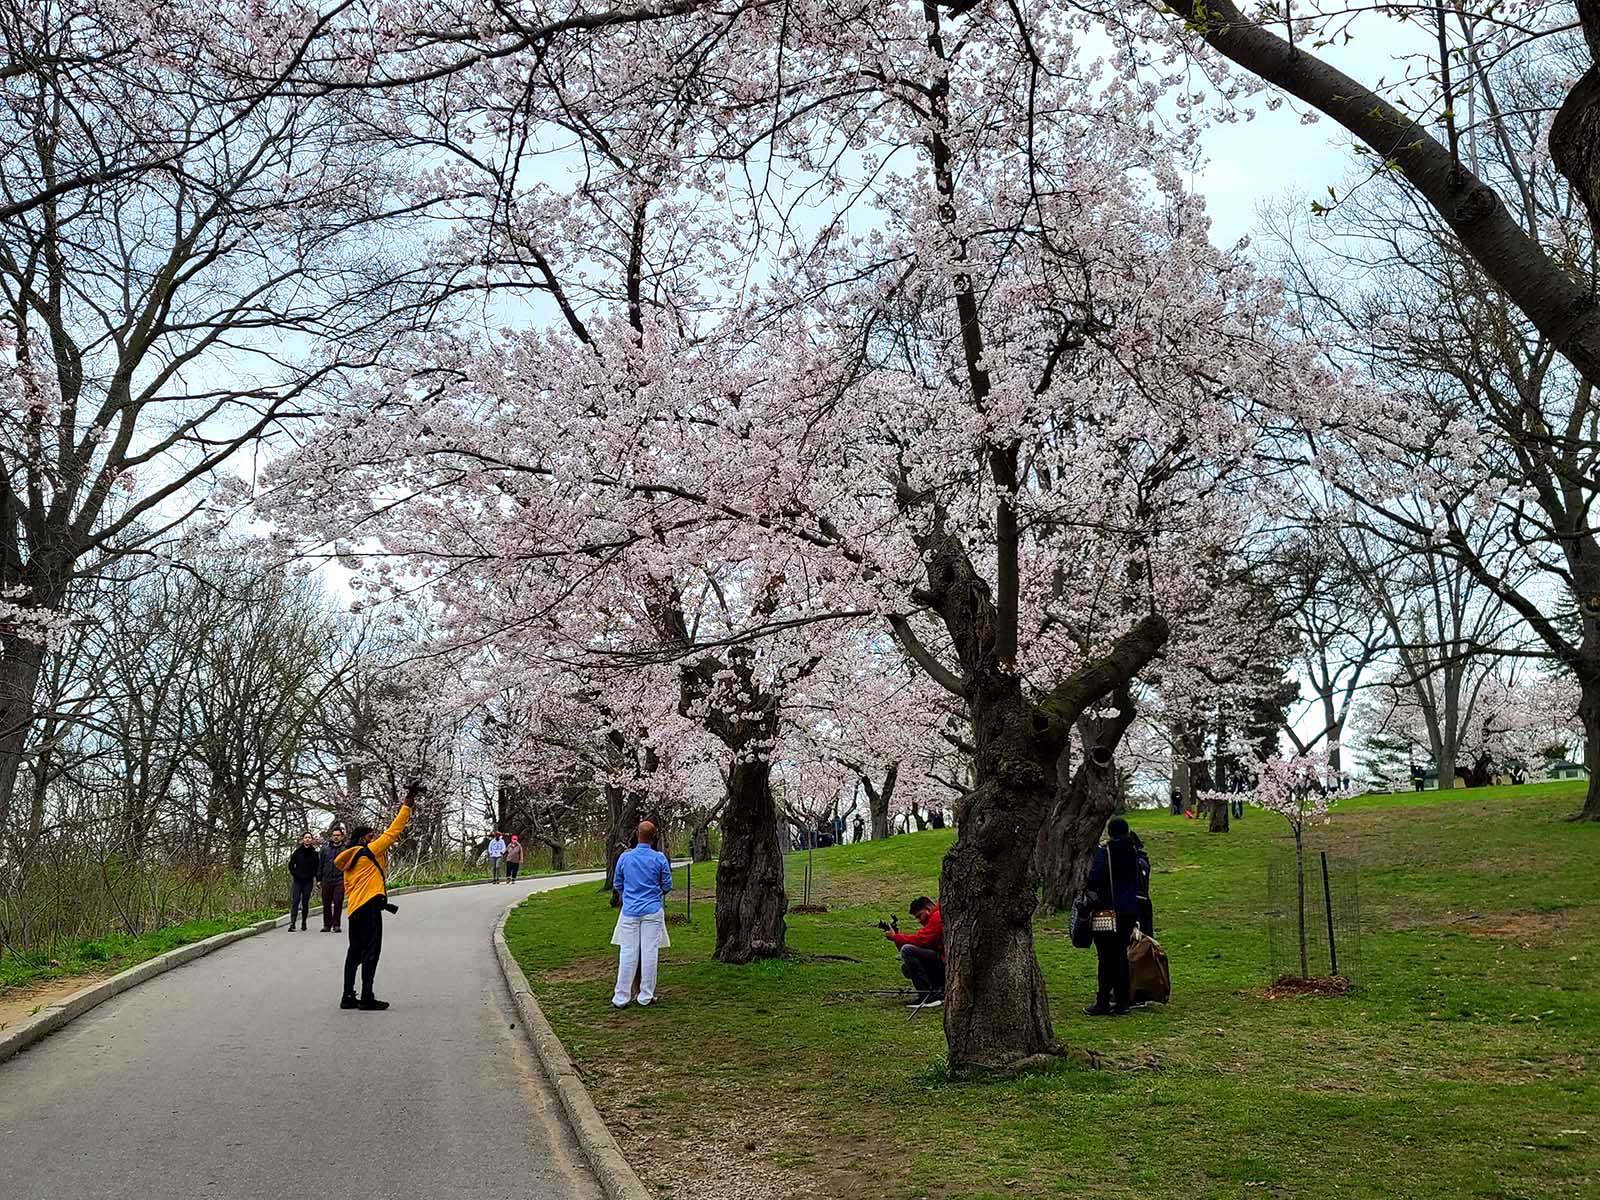 Cherry blossoms in full bloom in High Park.